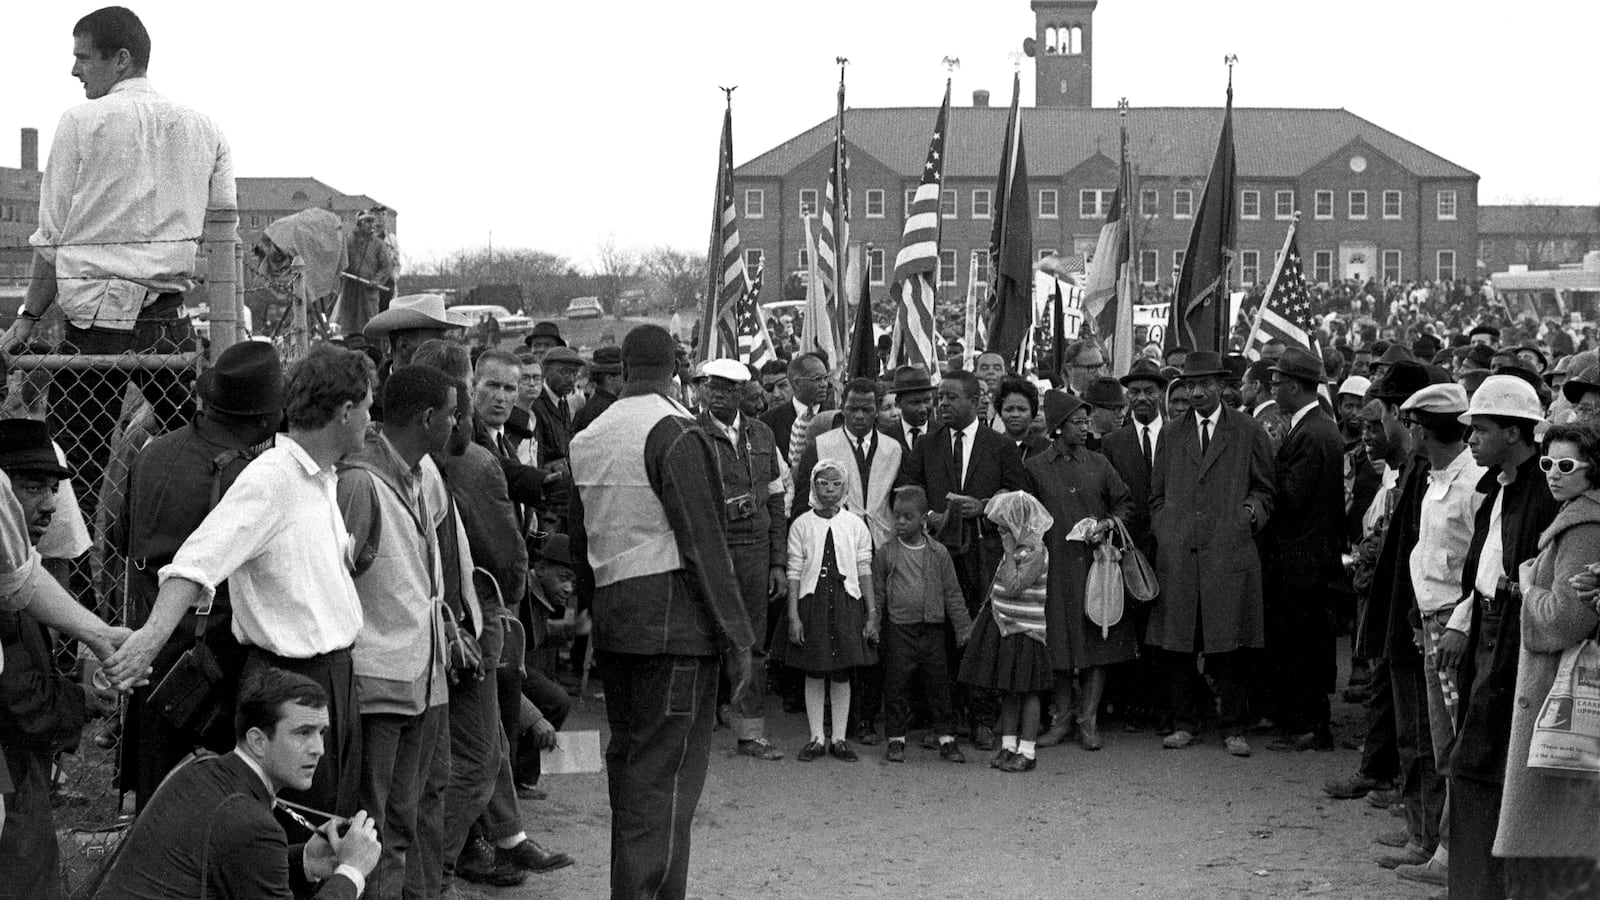 In this black and white image from 1965, John Lewis leads 25,000 marchers in front of City of St. Jude Church in Selma, Ala, who prepare to march to the capitol in Montgomery, Ala.